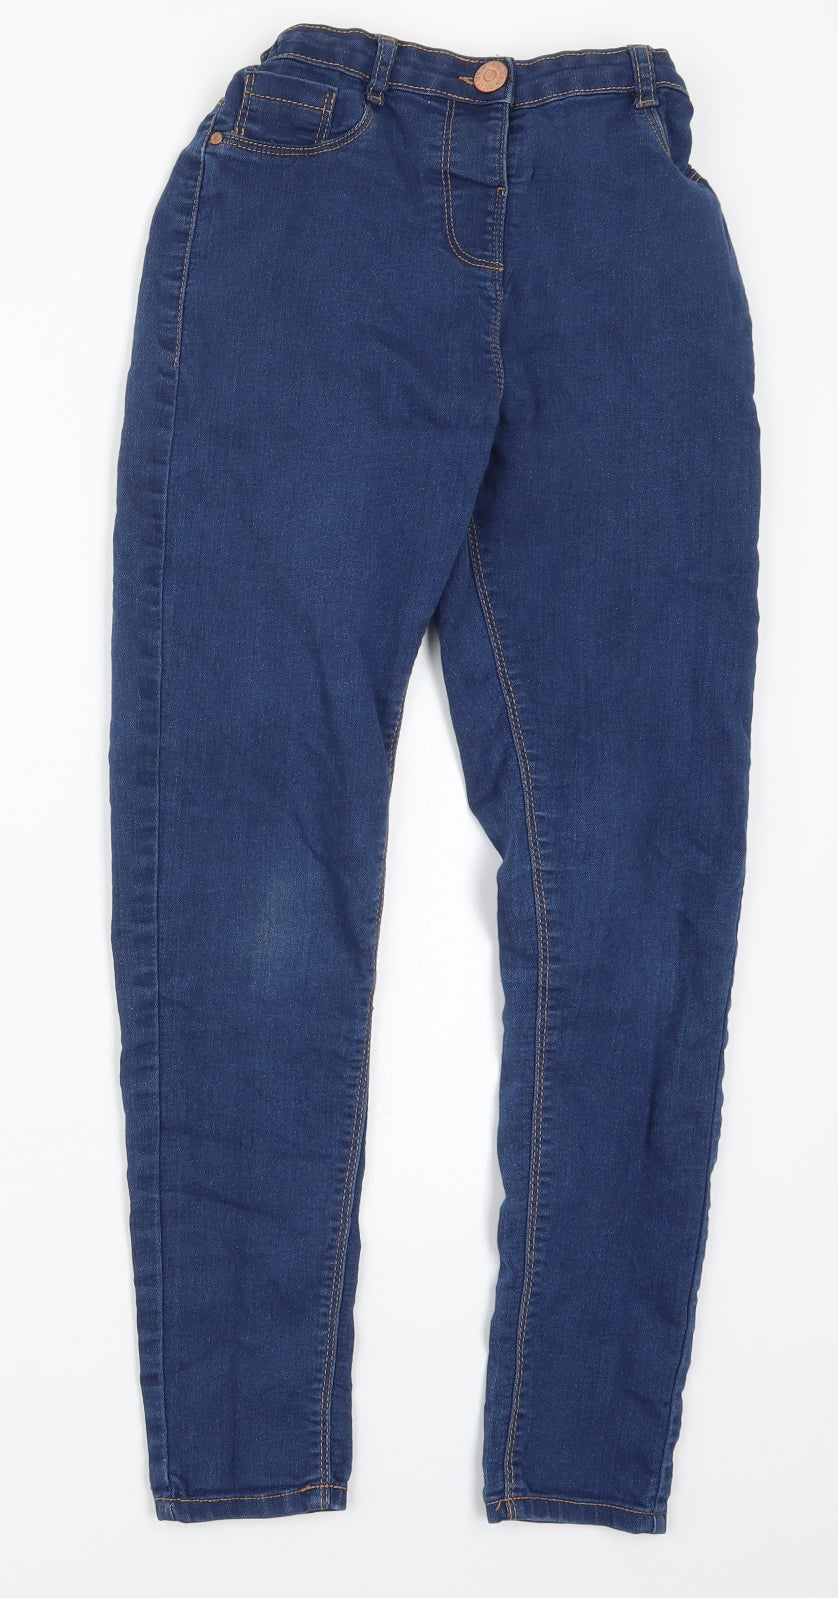 Dunnes Girls Blue  Cotton Skinny Jeans Size 11 Years  Regular Button